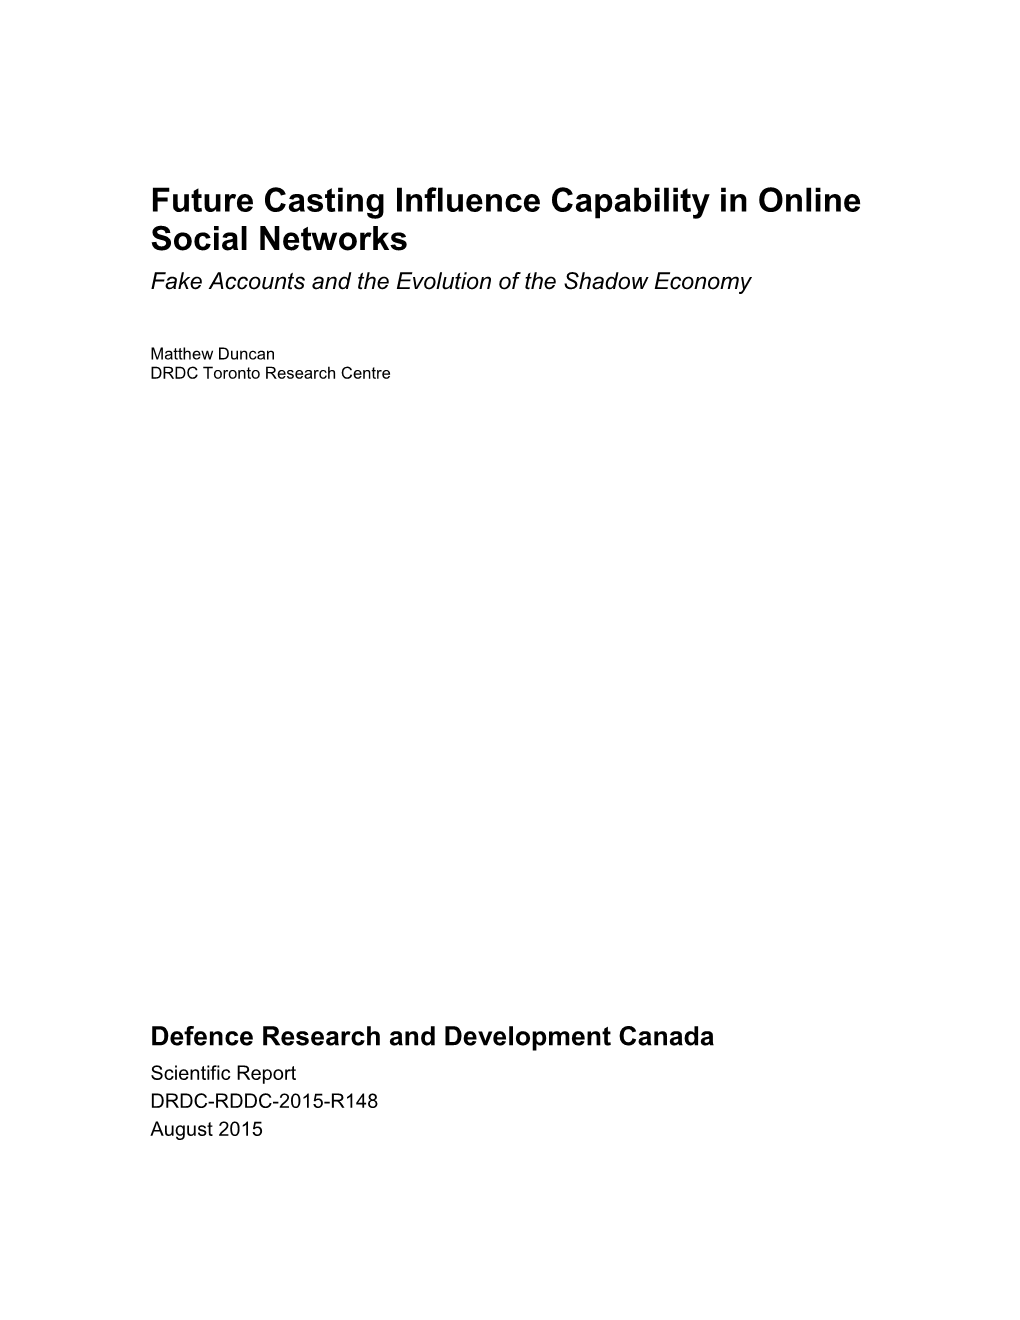 Future Casting Influence Capability in Online Social Networks Fake Accounts and the Evolution of the Shadow Economy